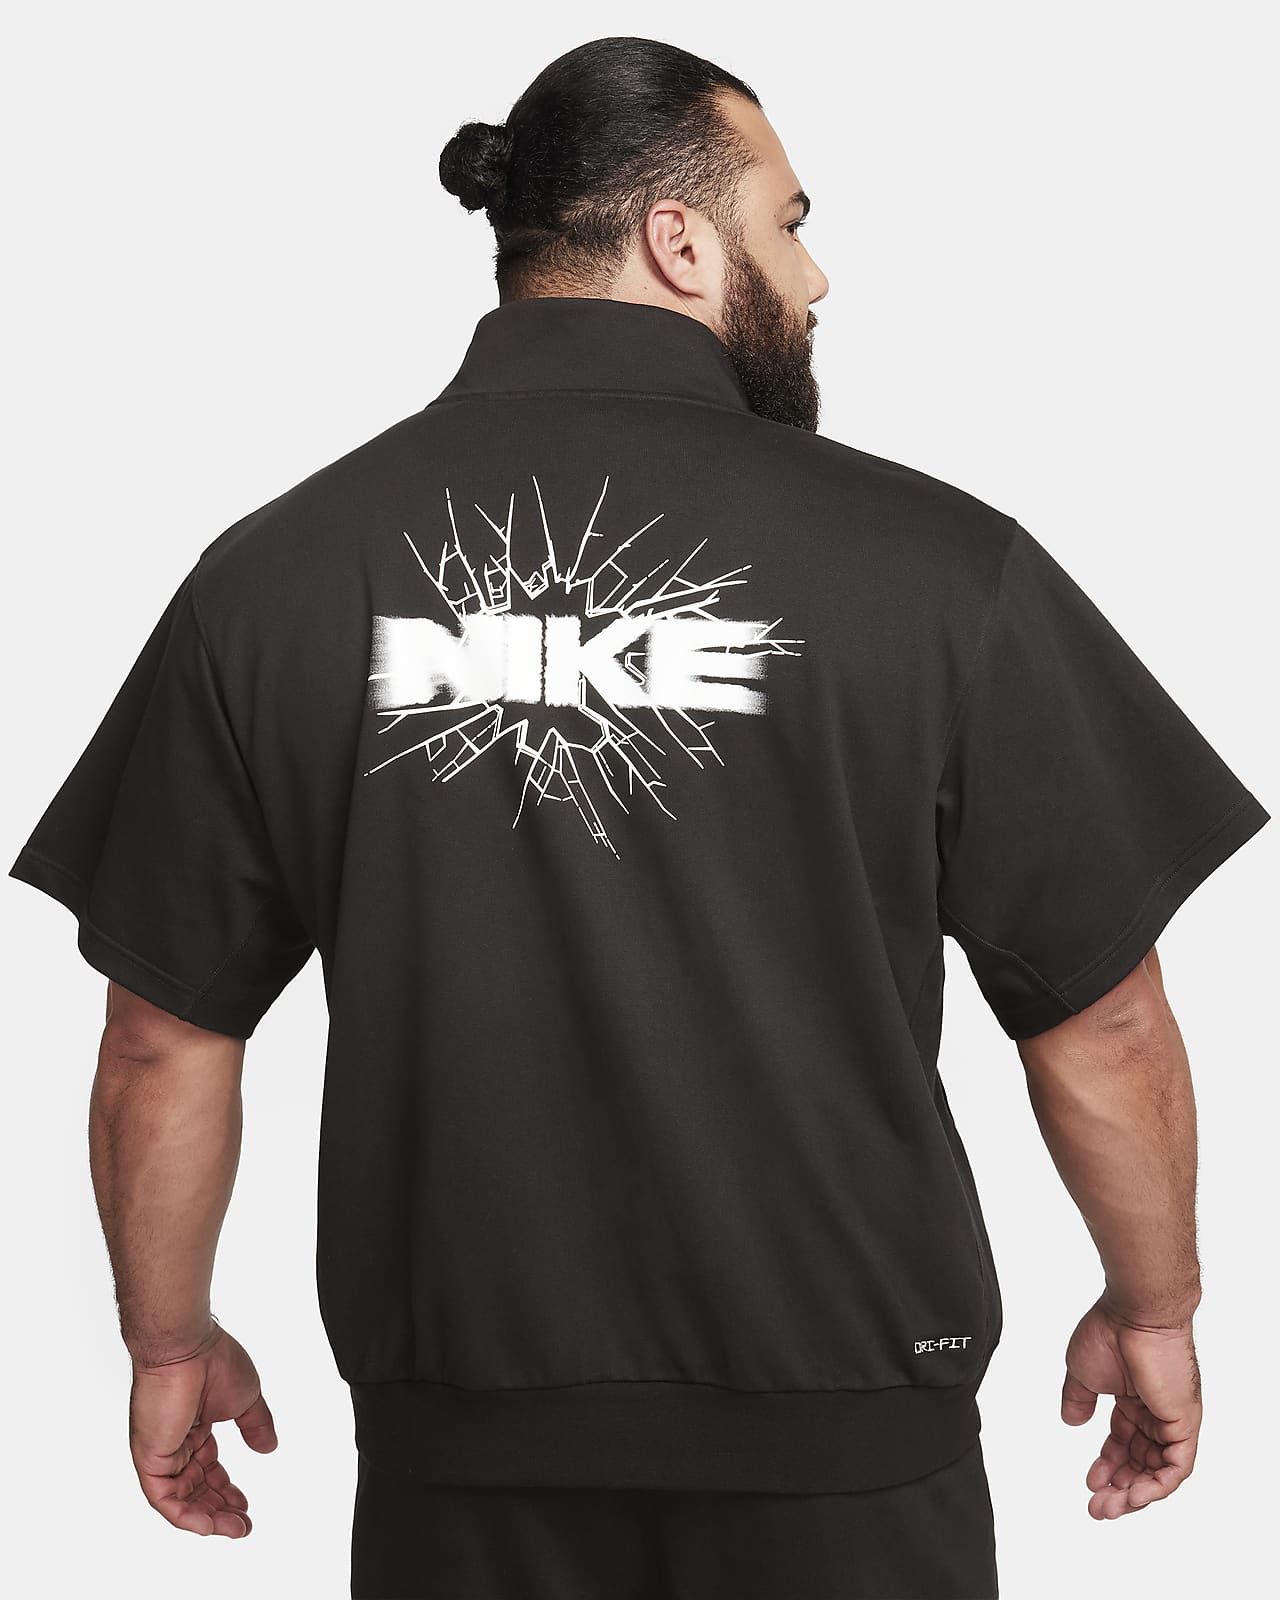 https://static.nike.com/a/images/t_PDP_1280_v1/f_auto,q_auto:eco/0f5b8715-d9ca-400f-94a4-056ce8a5cbbd/dri-fit-standard-issue-mens-1-4-zip-short-sleeve-basketball-top-3F0s2k.png